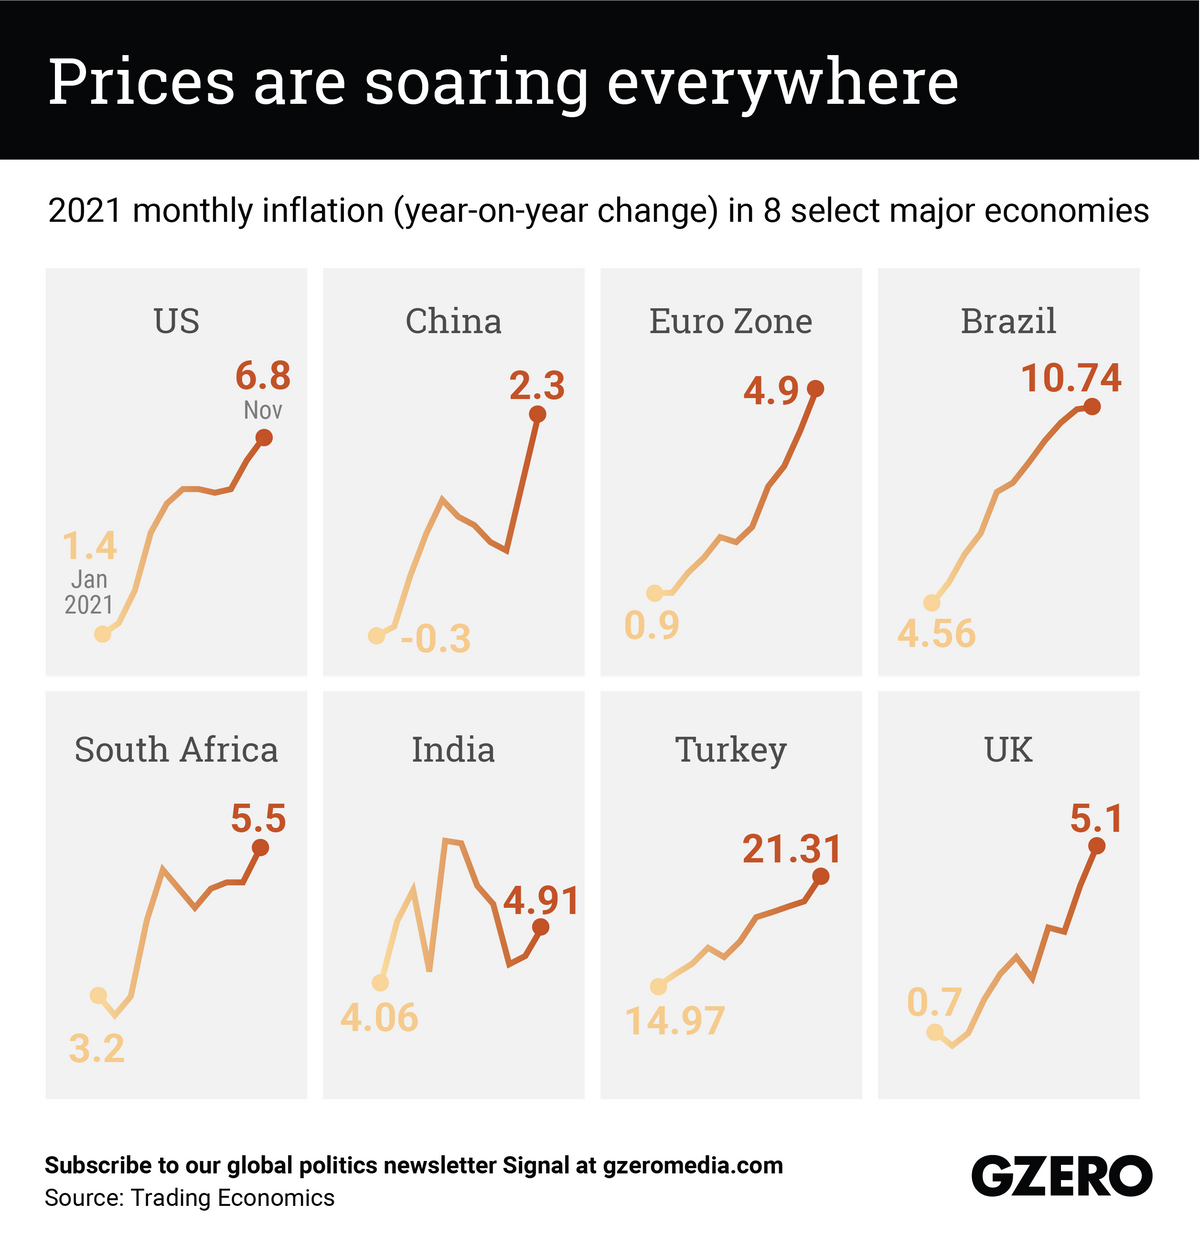 The Graphic Truth: Prices are soaring everywhere